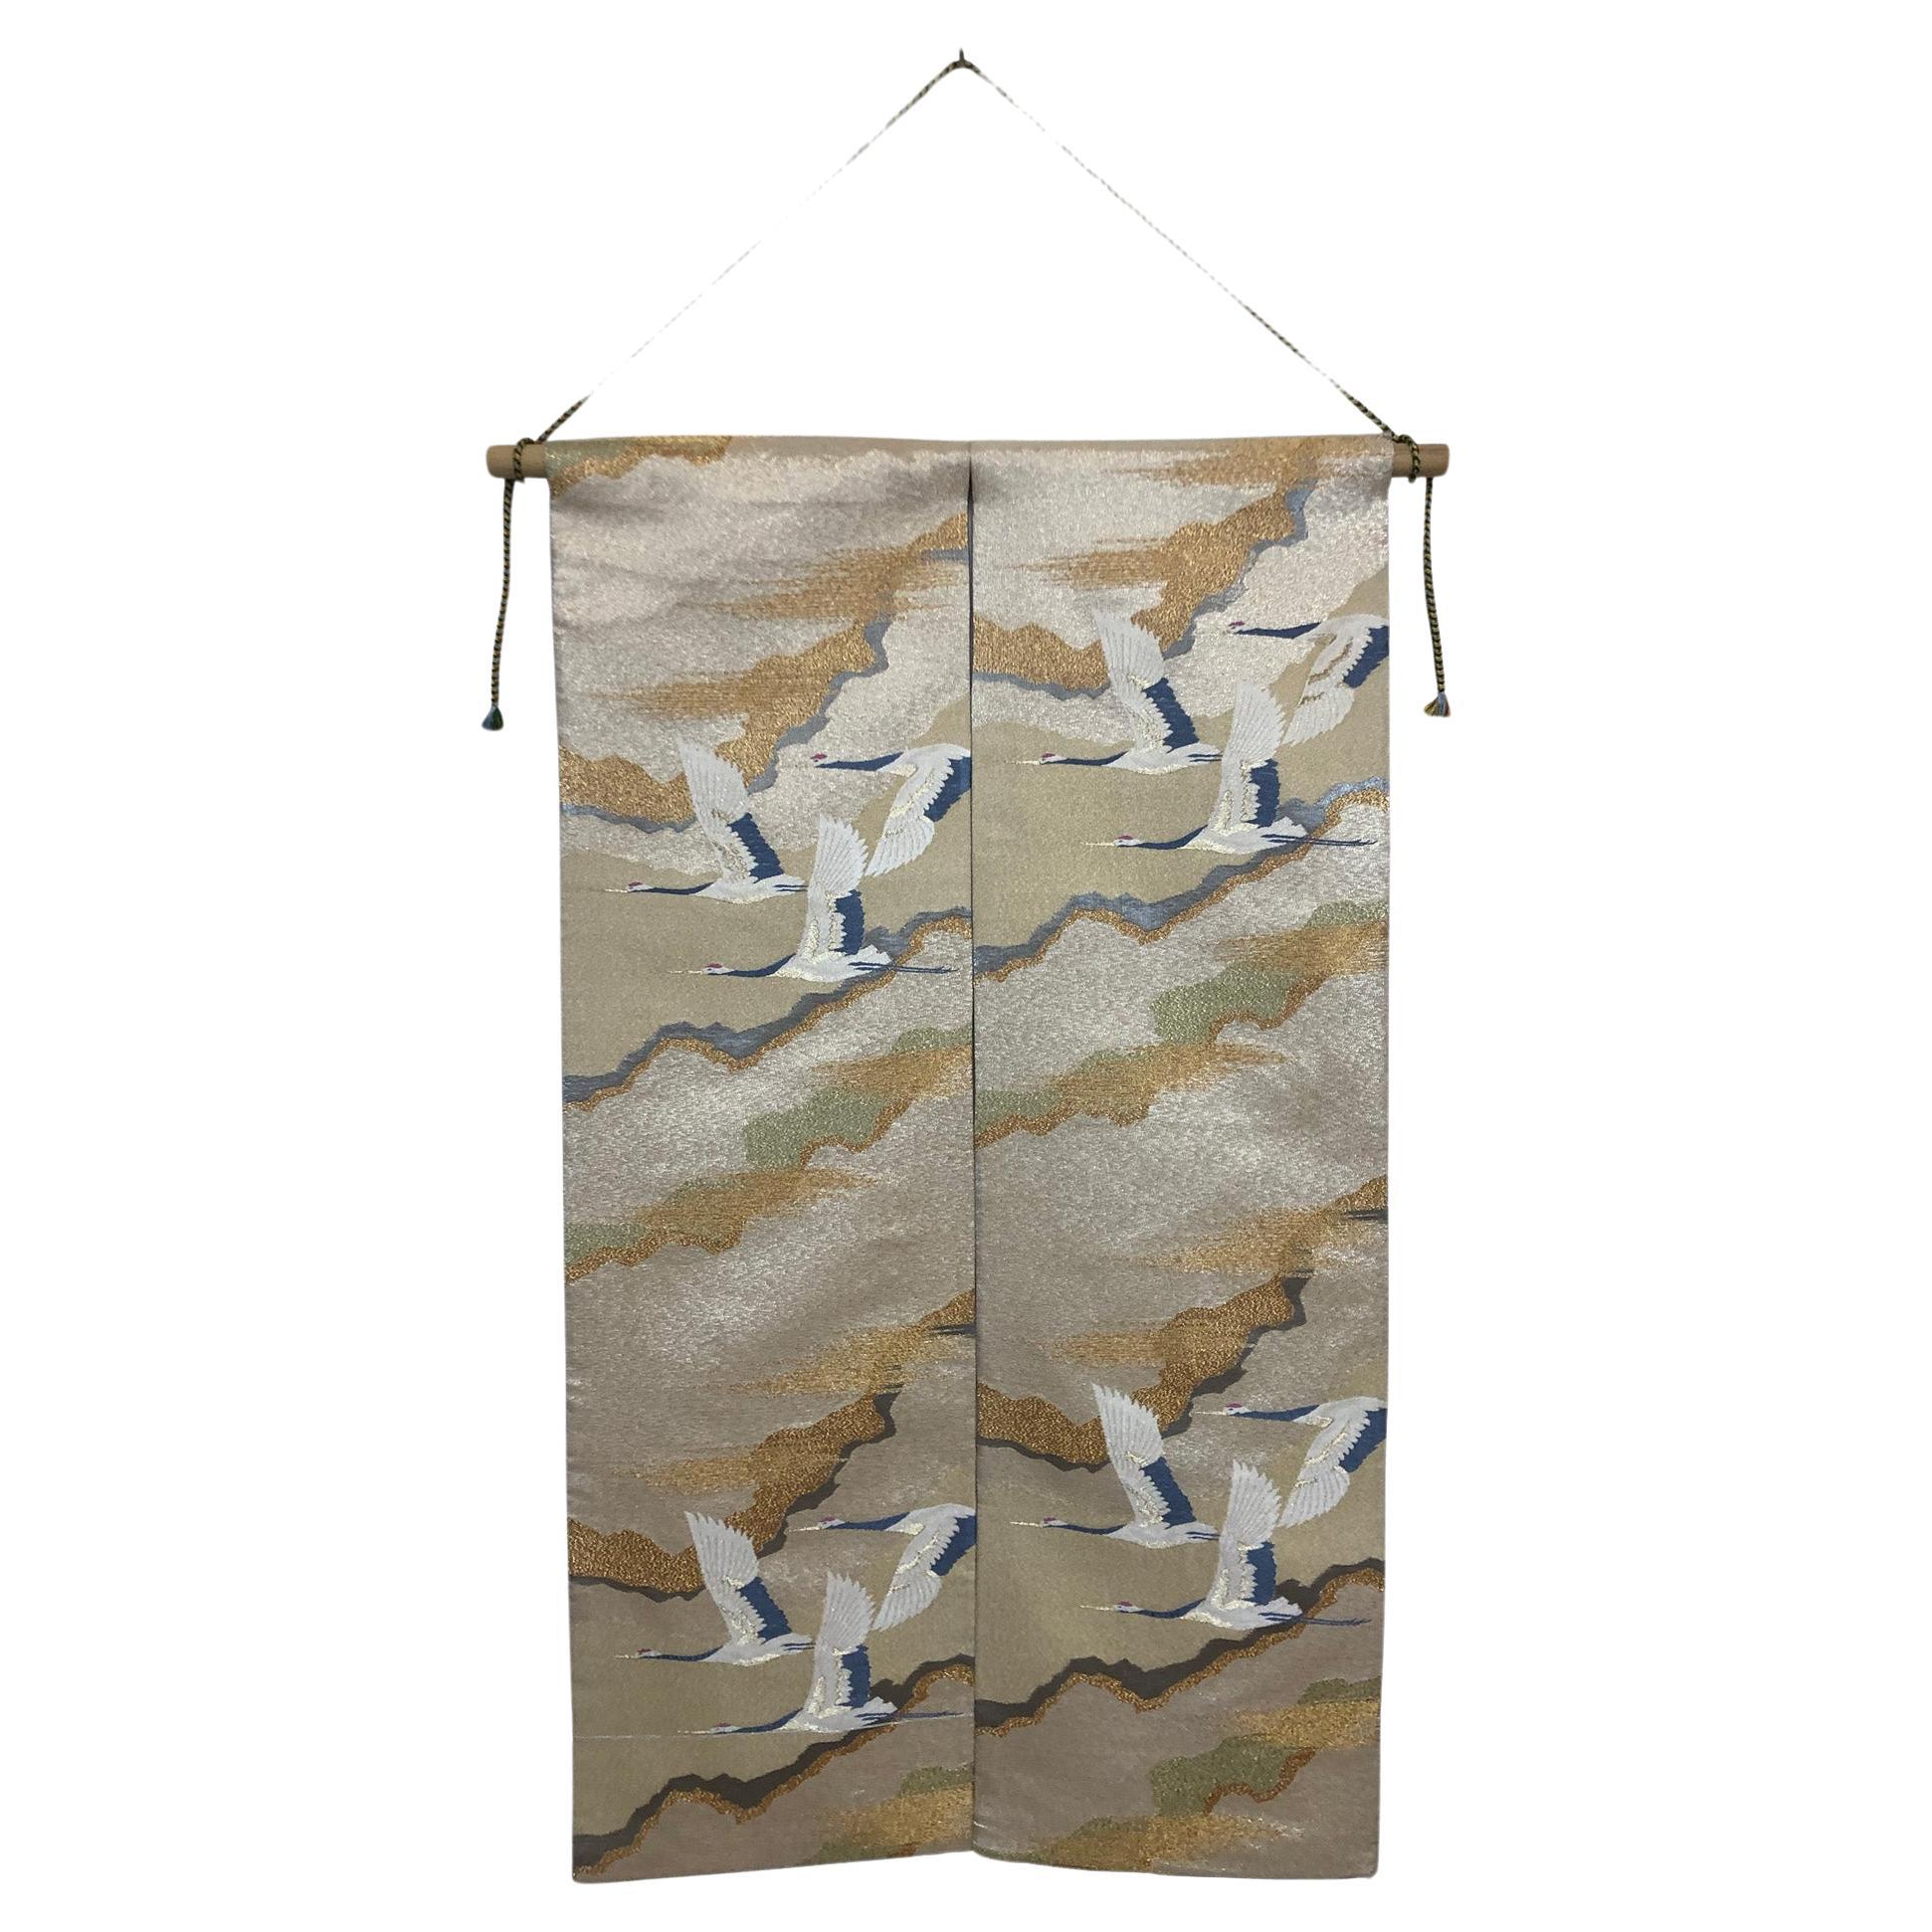 Kimono Tapestry "Crane's Feathered Dance" Japanese Hanging Scroll, Japanese Art For Sale